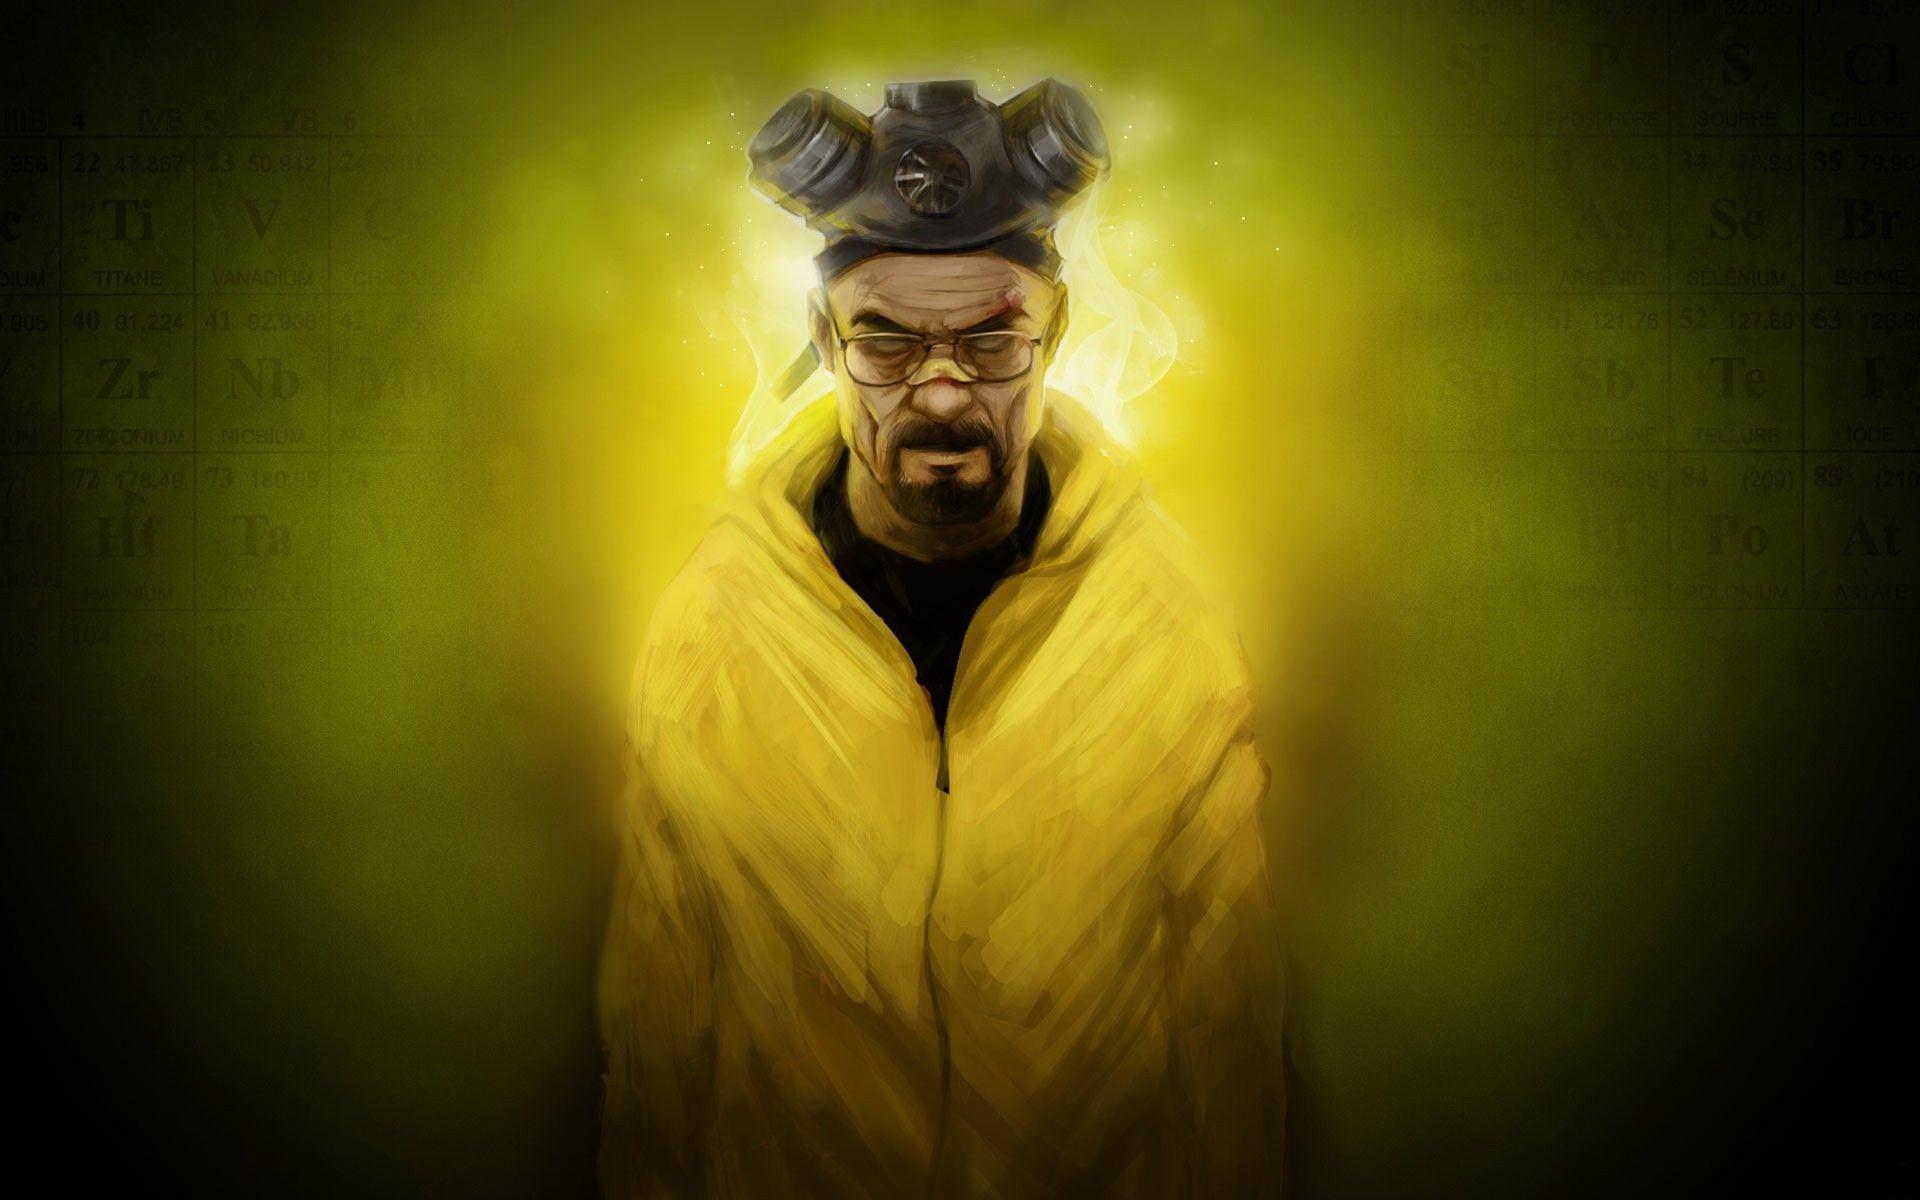 Amazing Breaking Bad Artwork. Android wallpaper for free